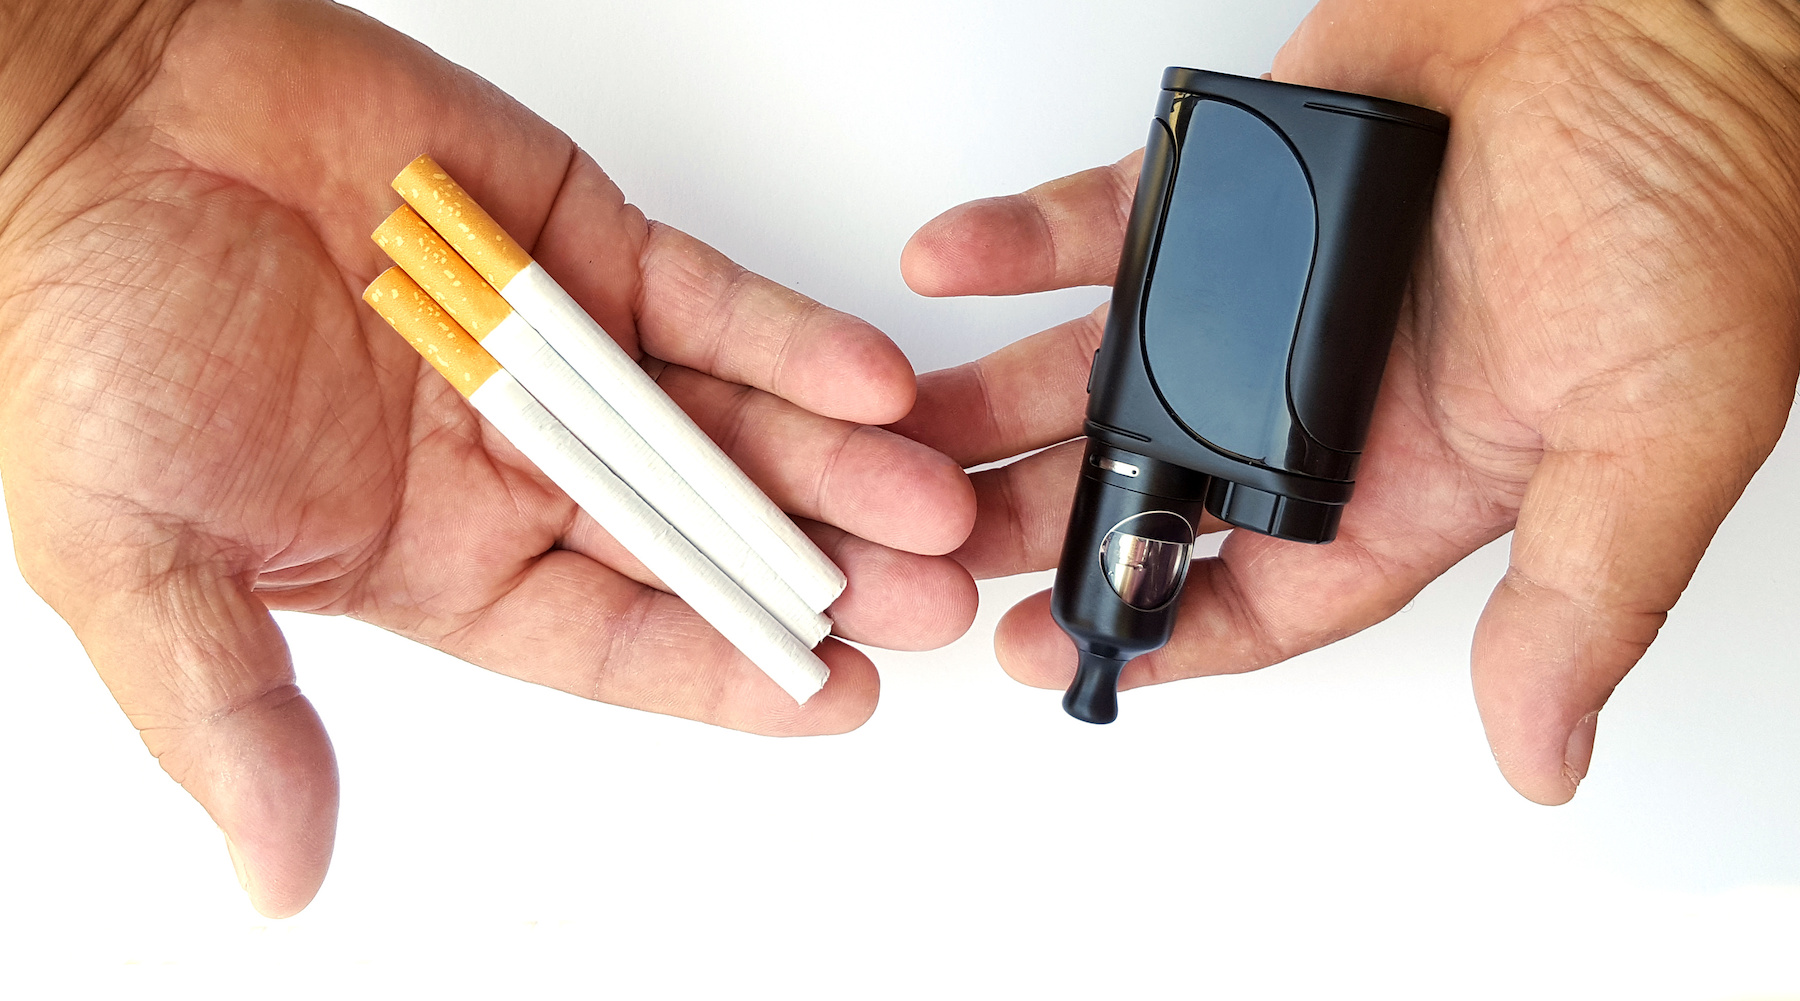 Vaping and smoking cessation in Spanish